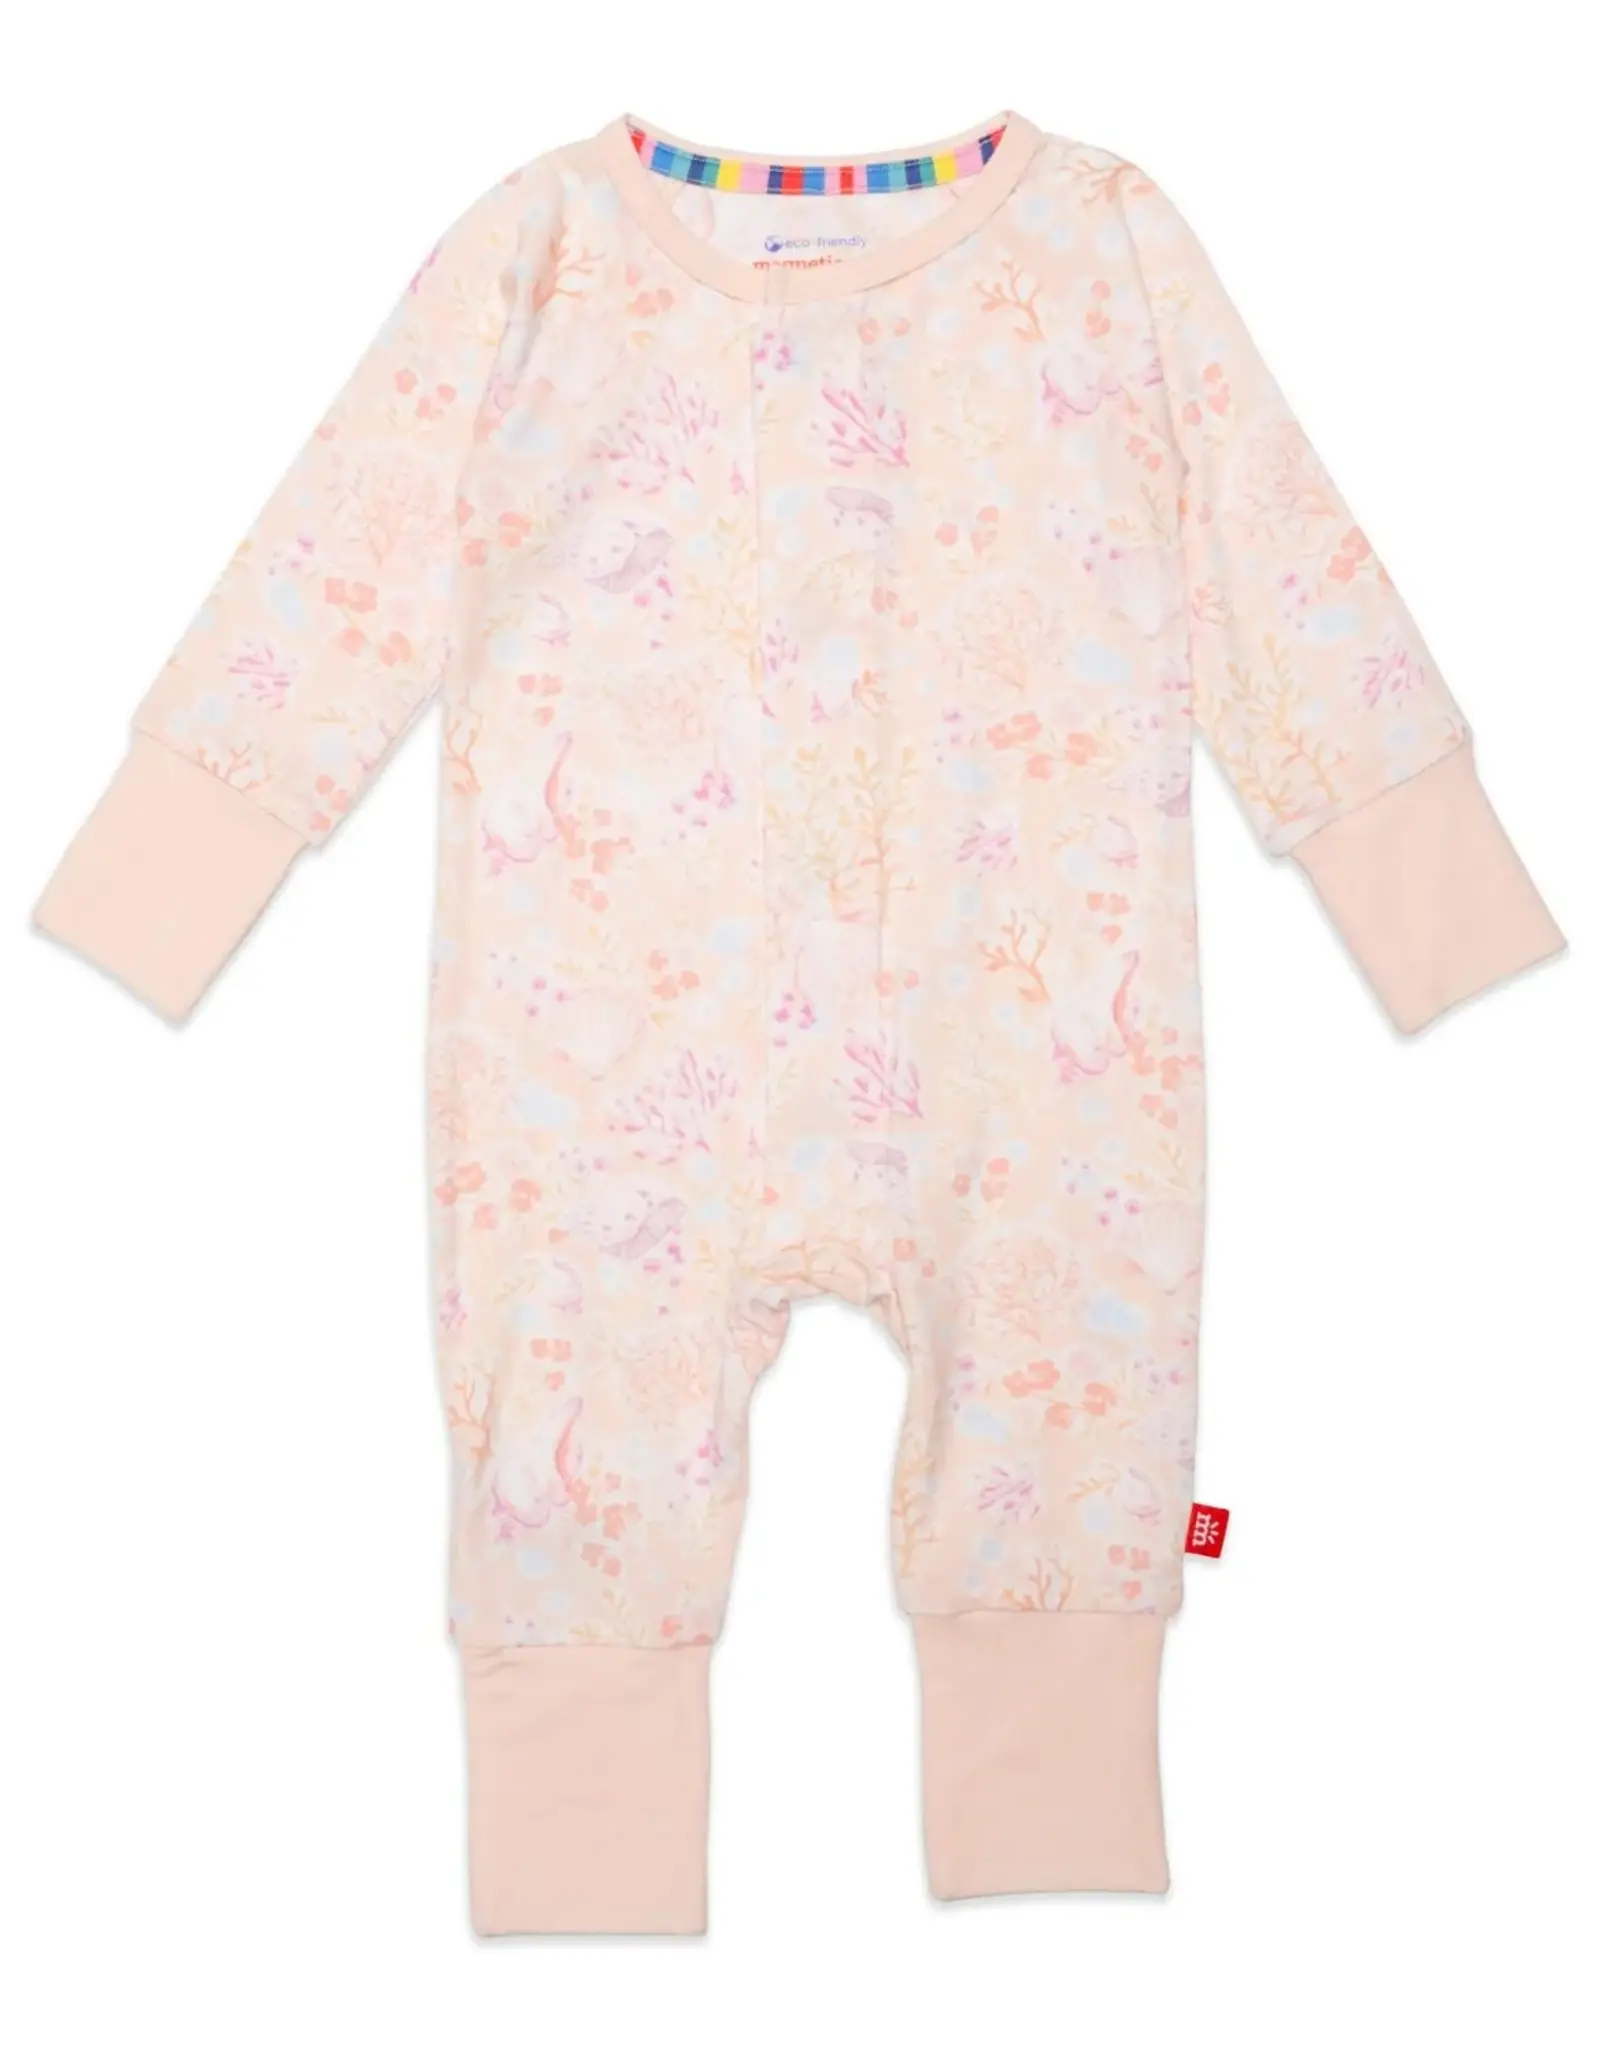 Magnetic Me 9-12MO: Coral Floral Grow With Me Coverall